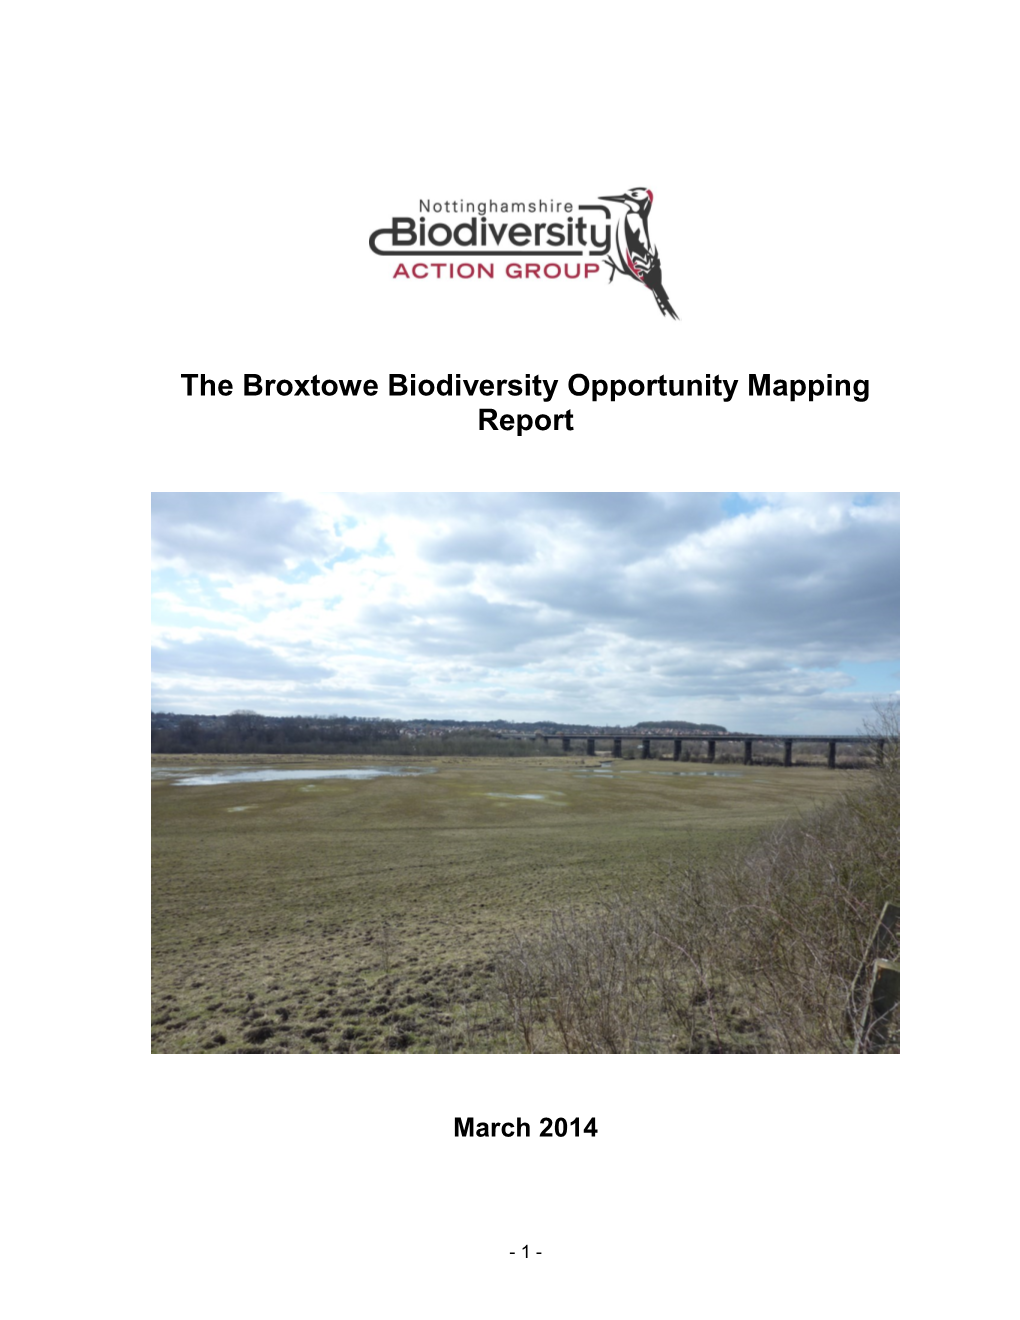 The Broxtowe Biodiversity Opportunity Mapping Report